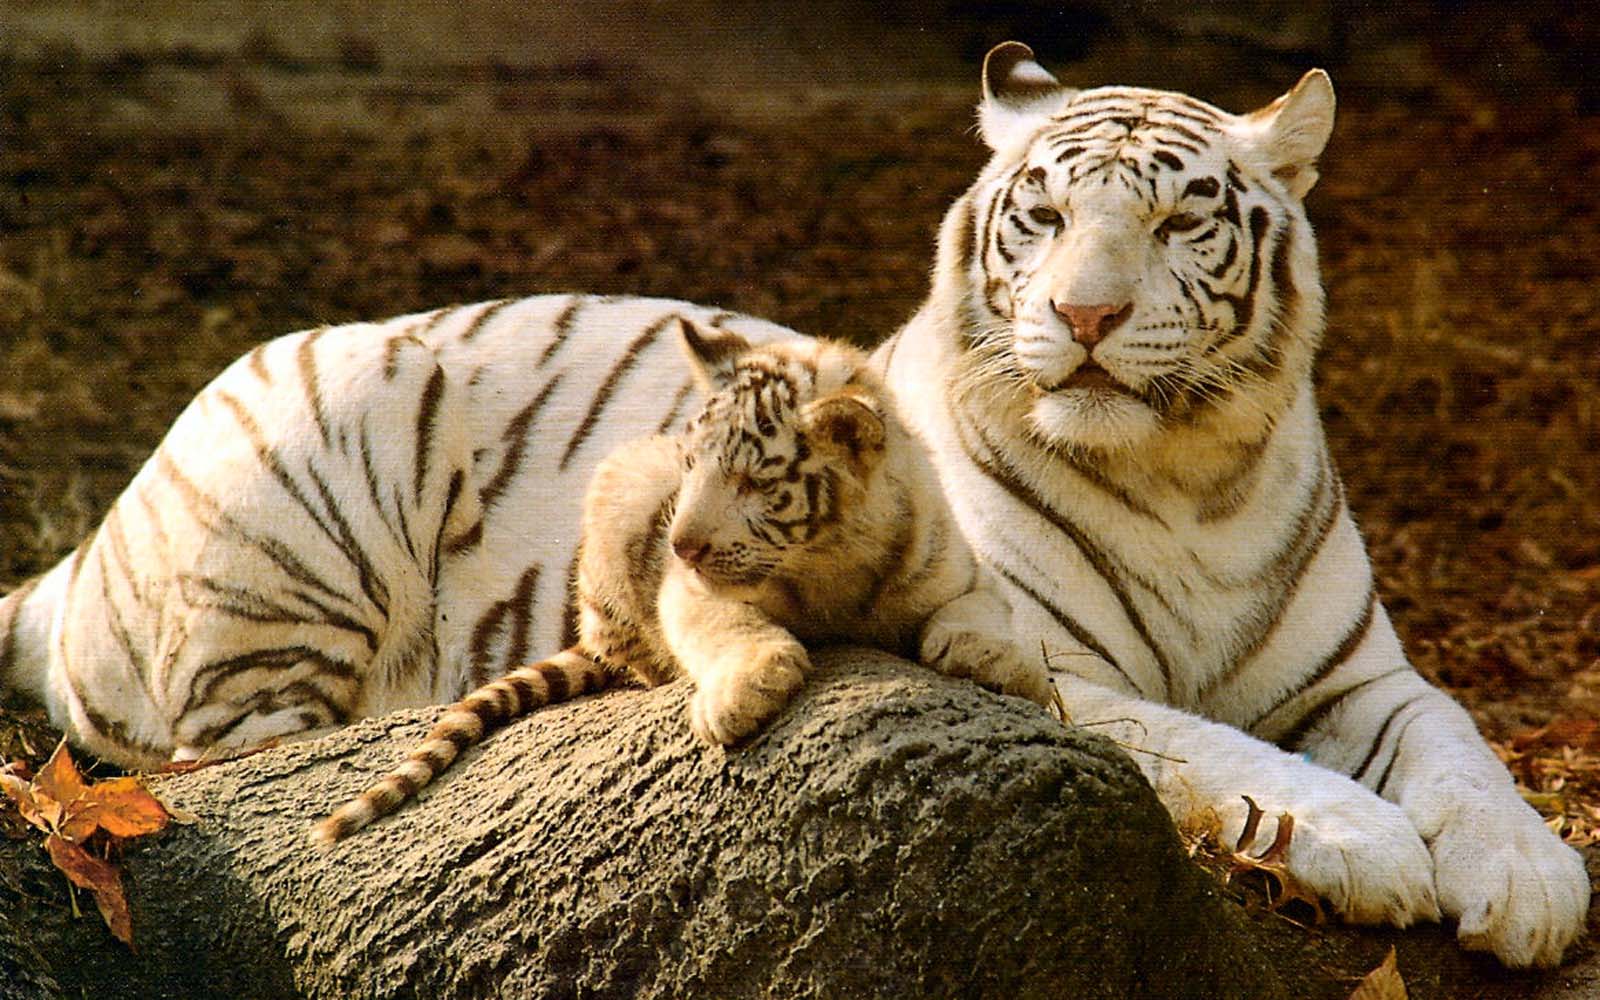 Baby White Tigers In Water Wallpaper
download Free - Mom And Baby White Tiger - HD Wallpaper 